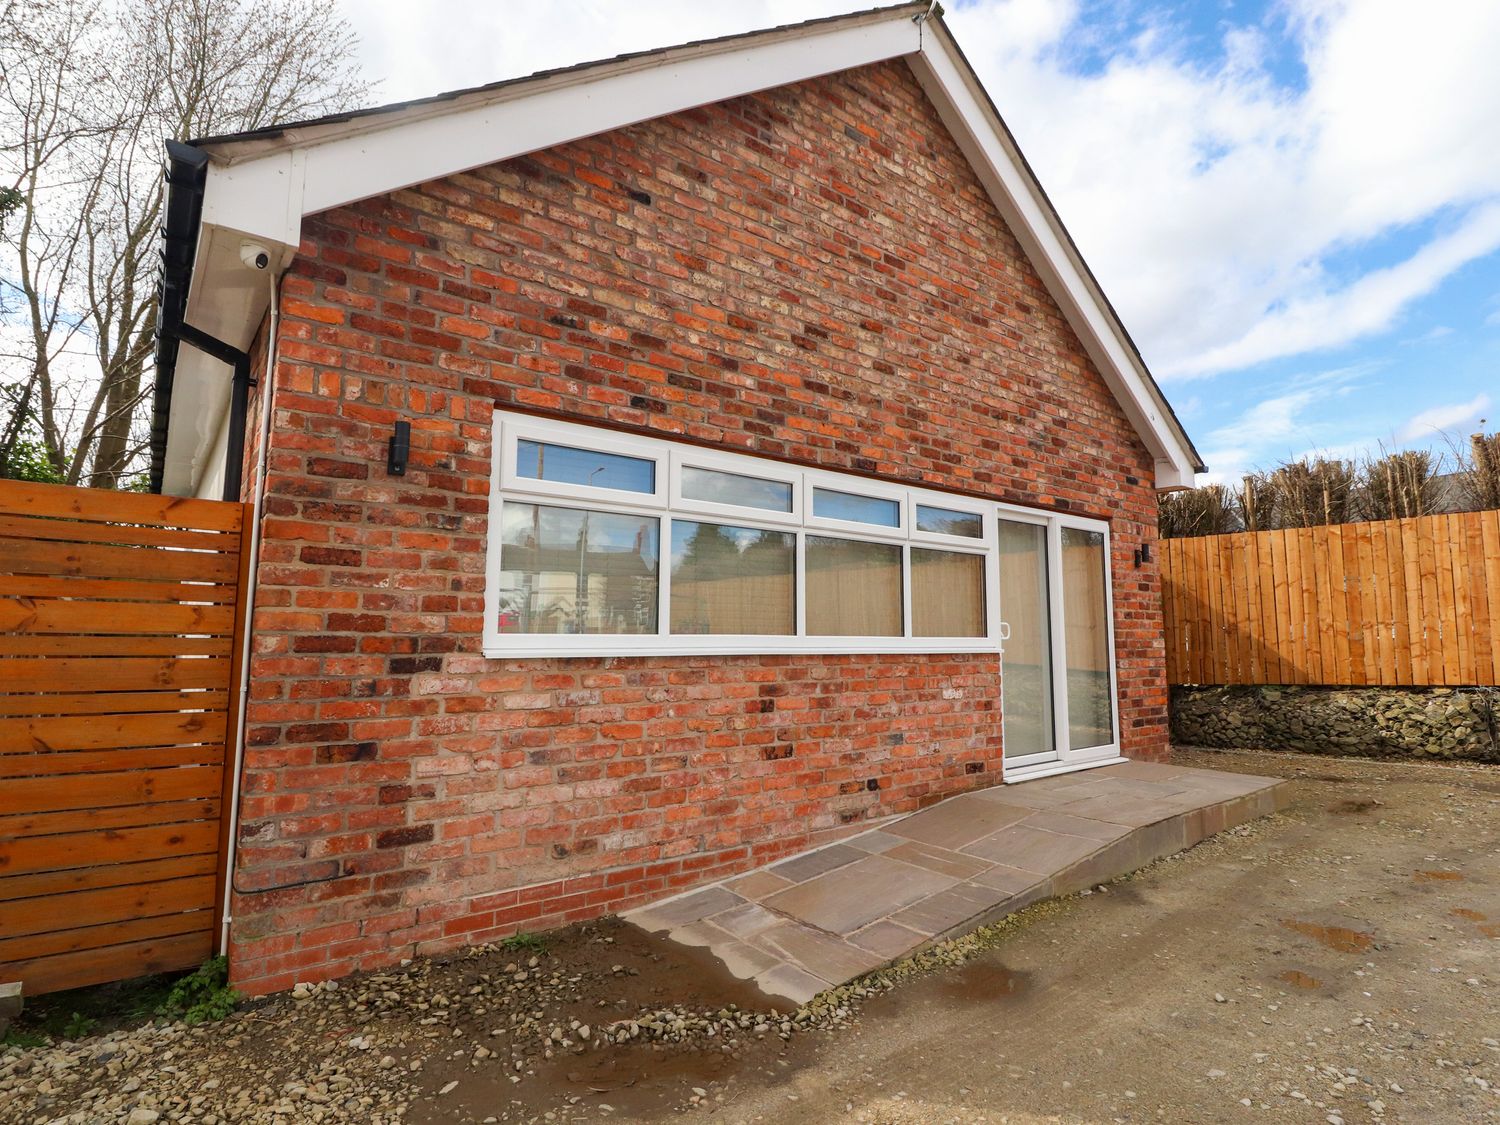 The bungalow at 46 Church St - Lake District - 1148803 - photo 1